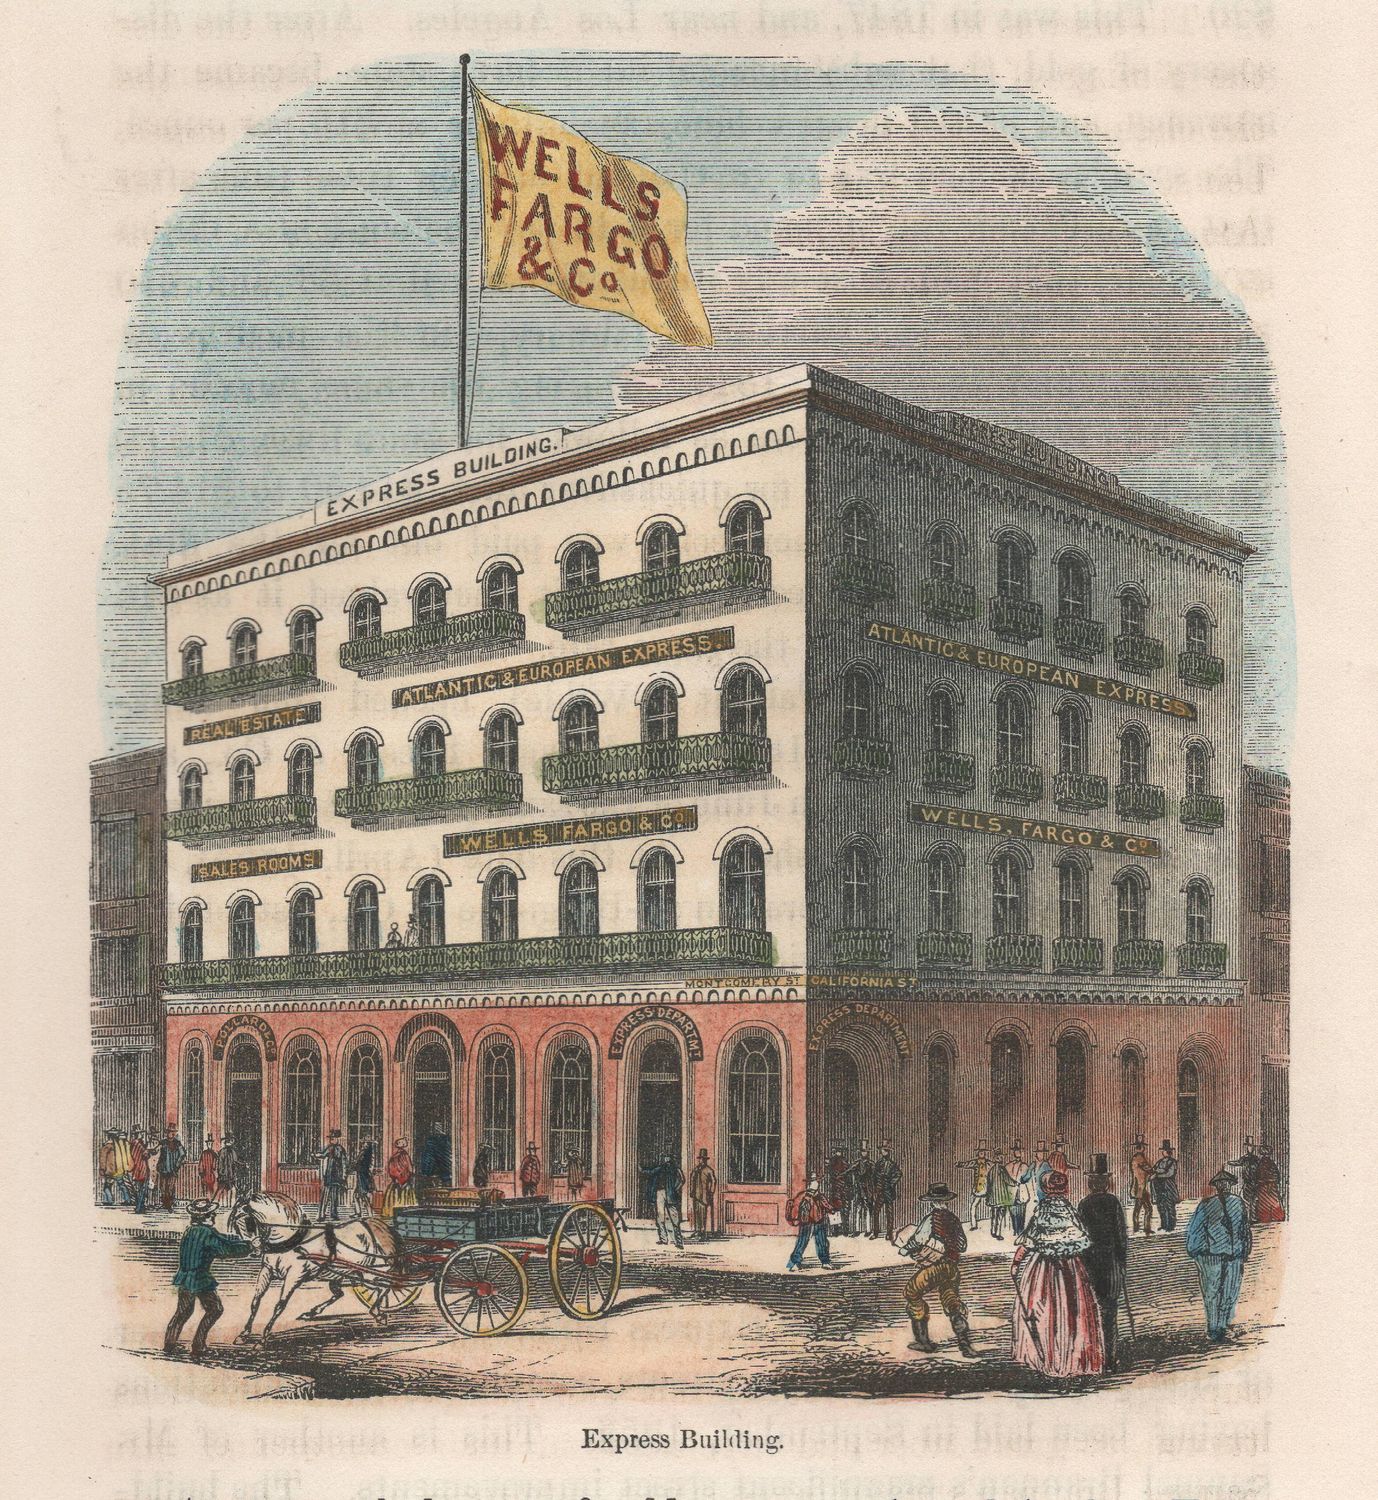 1855 Express Building of Wells Fargo from the Annals of SF